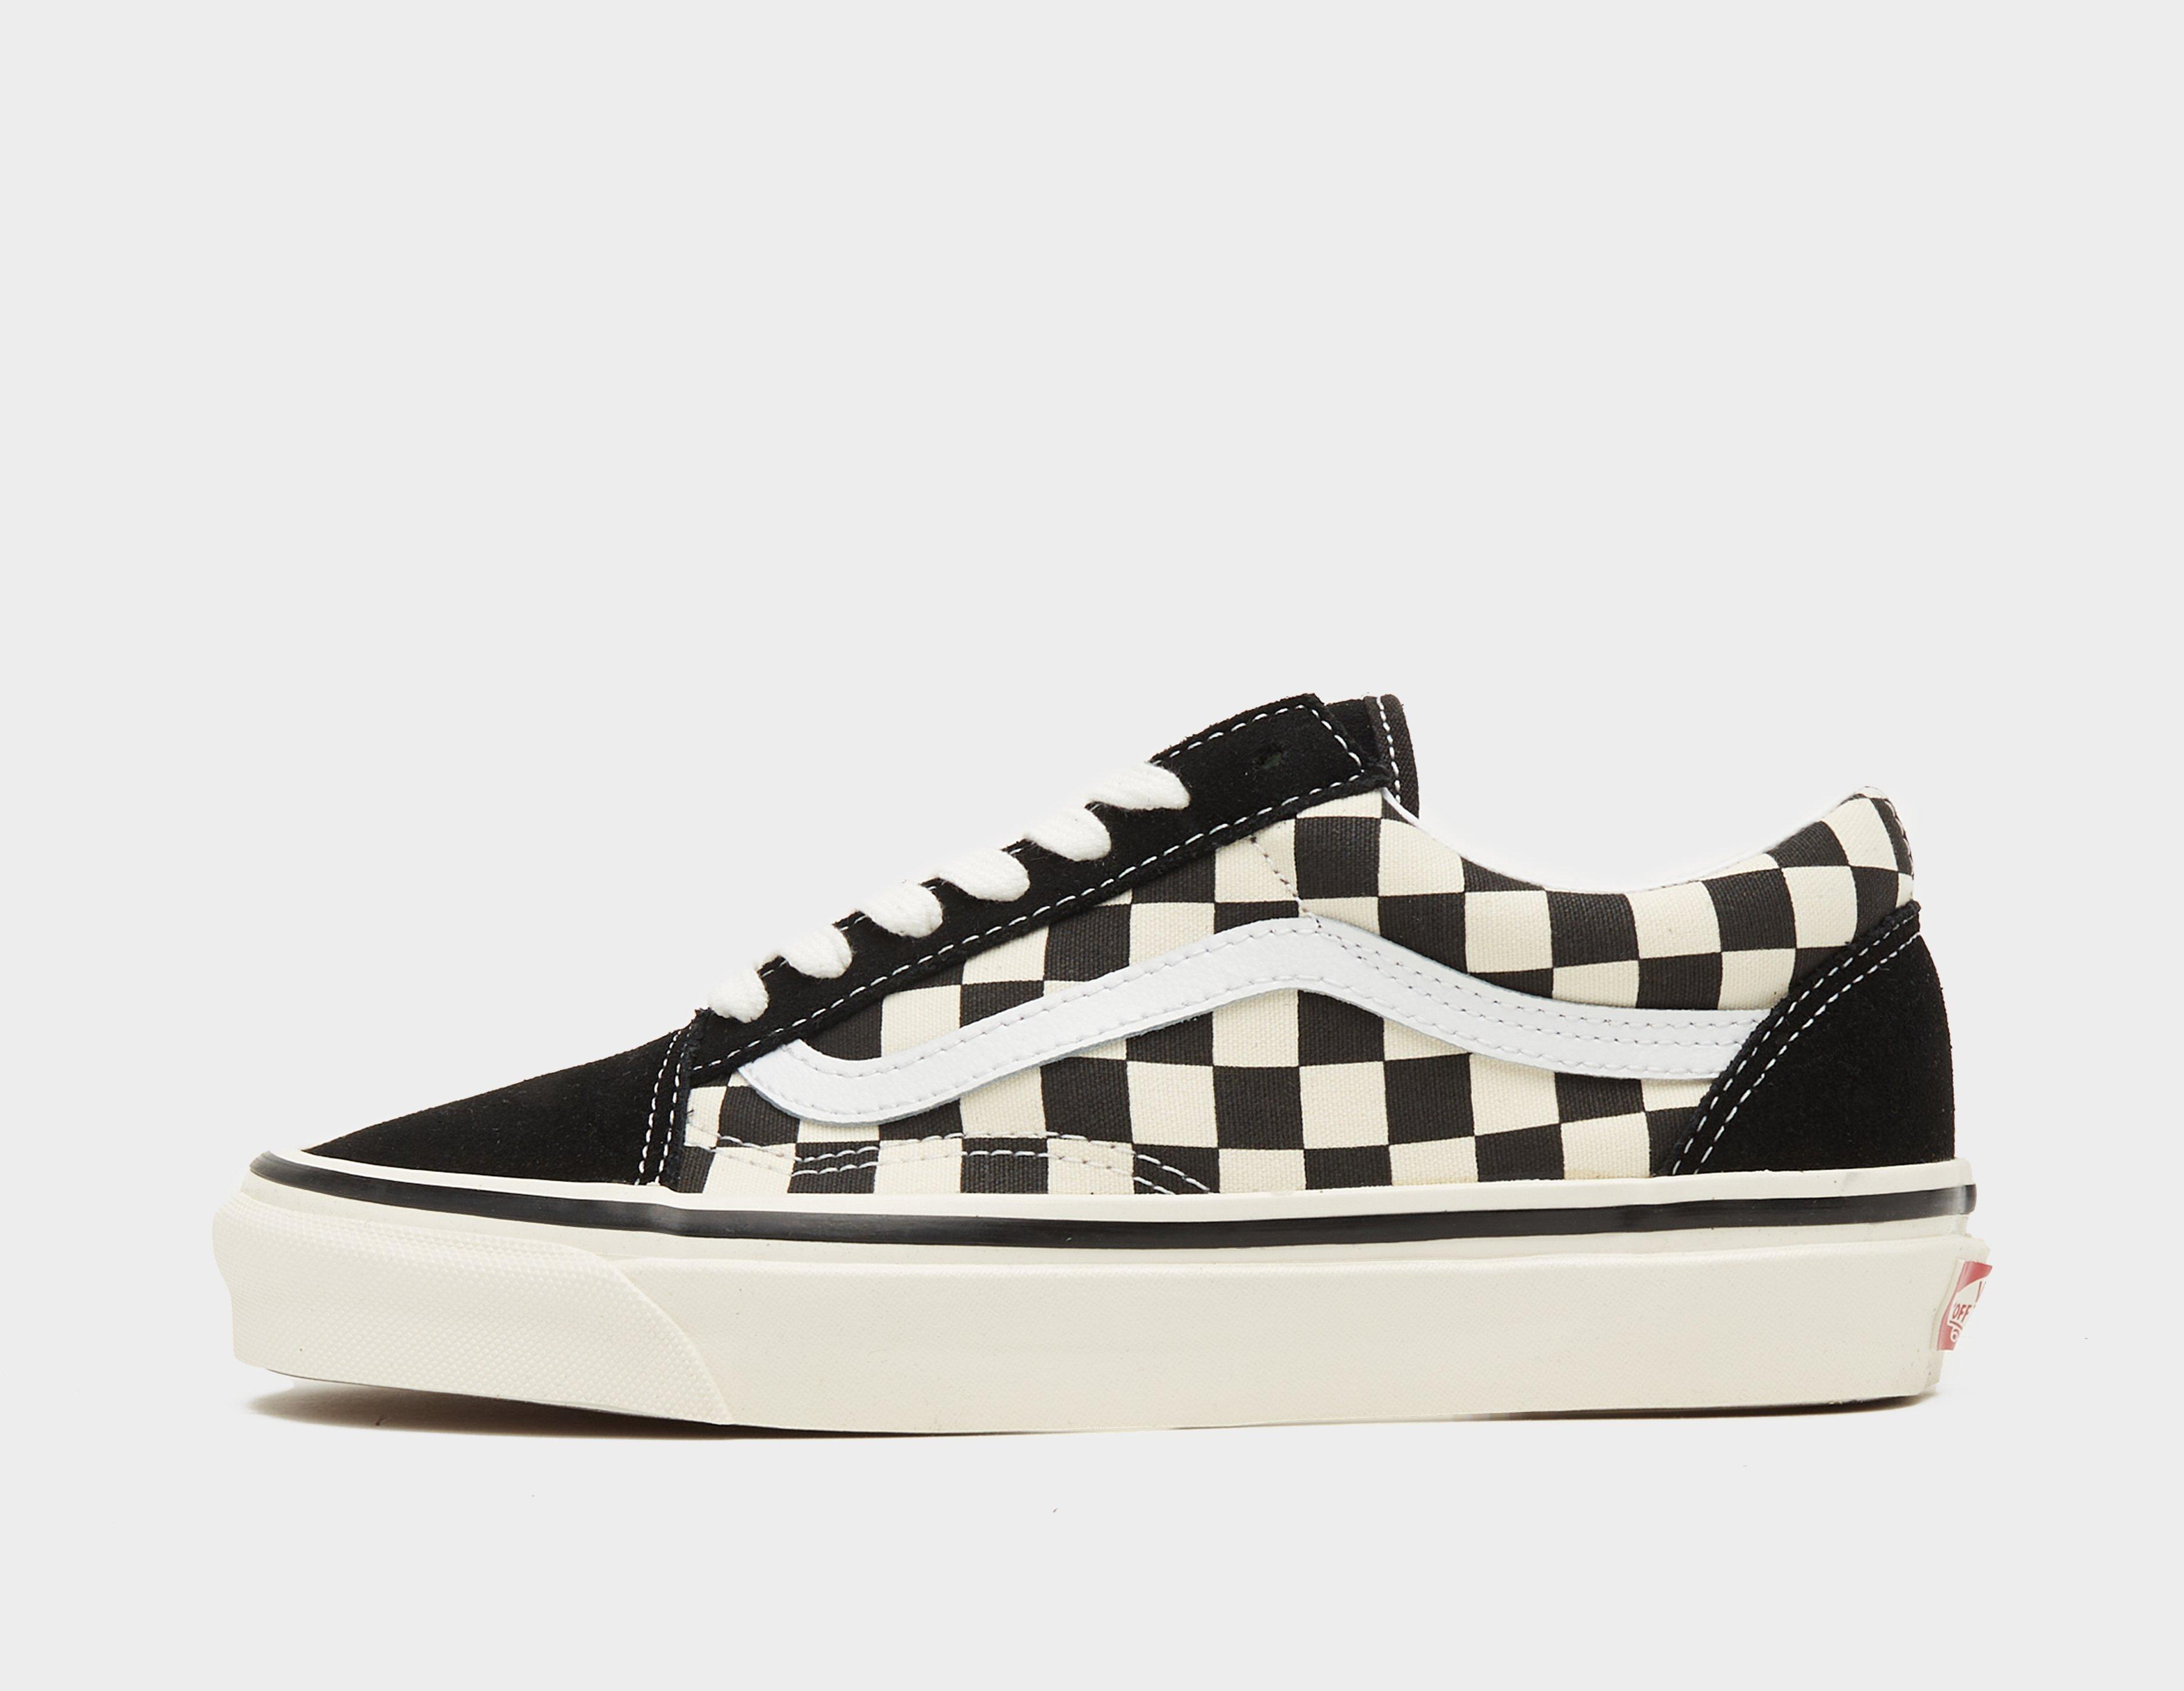 vans shoes return policy without receipt